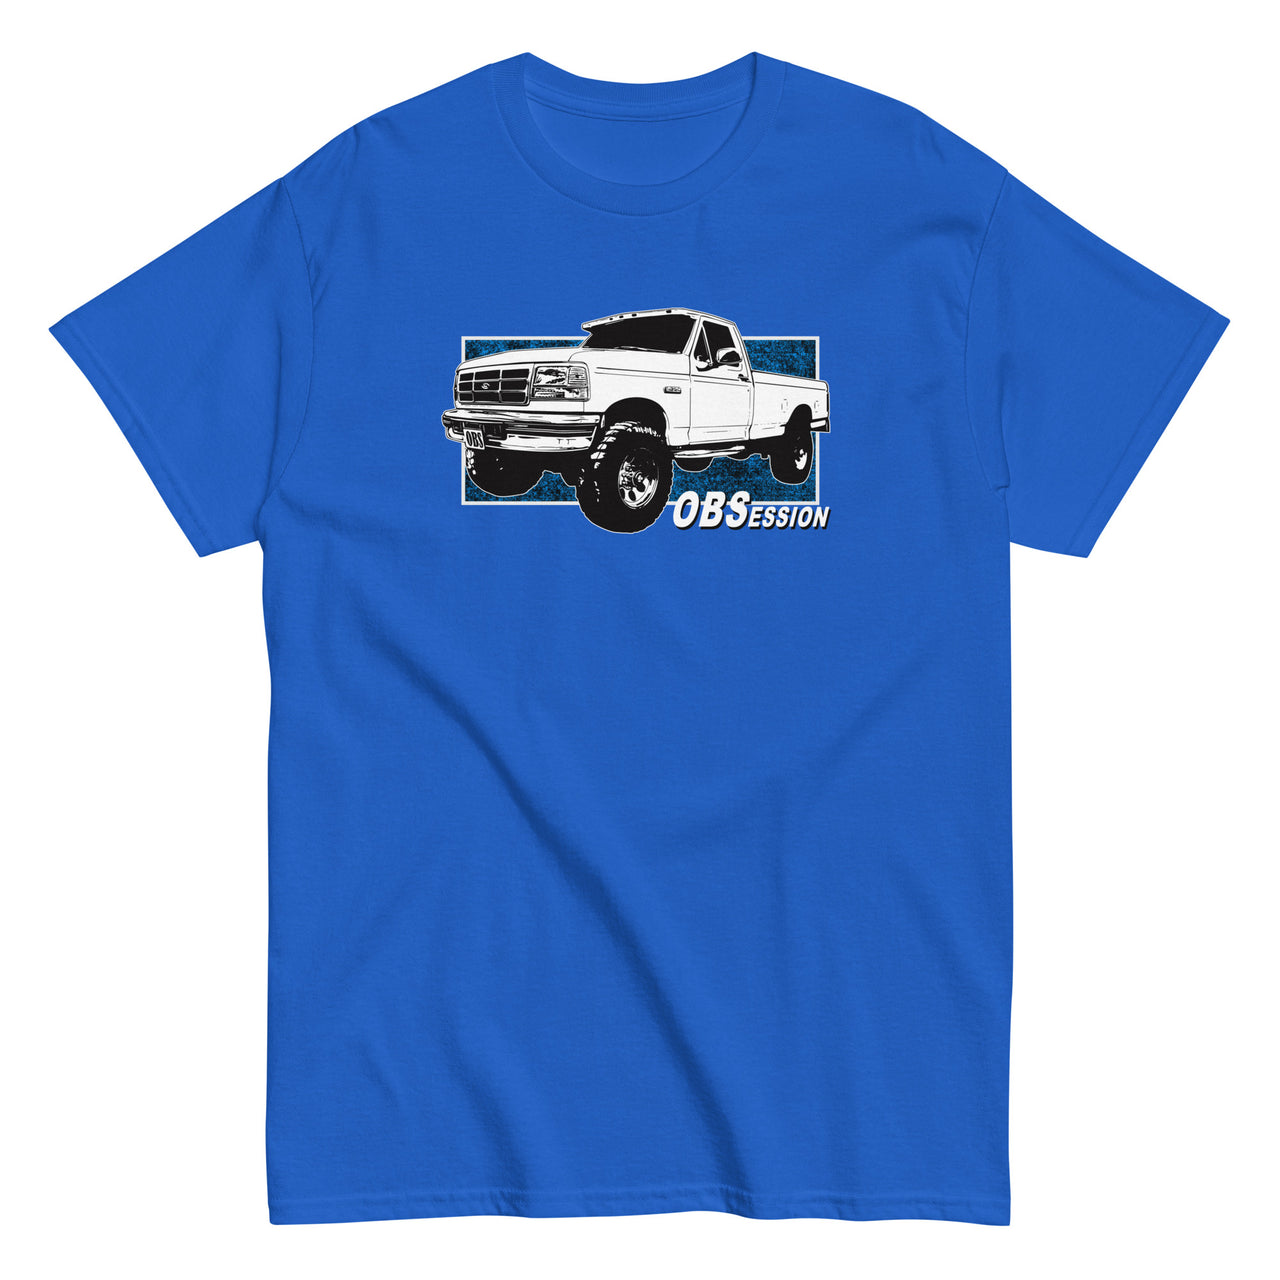 OBS Truck T-Shirt With Single Cab 90s Ford Truck - Royal